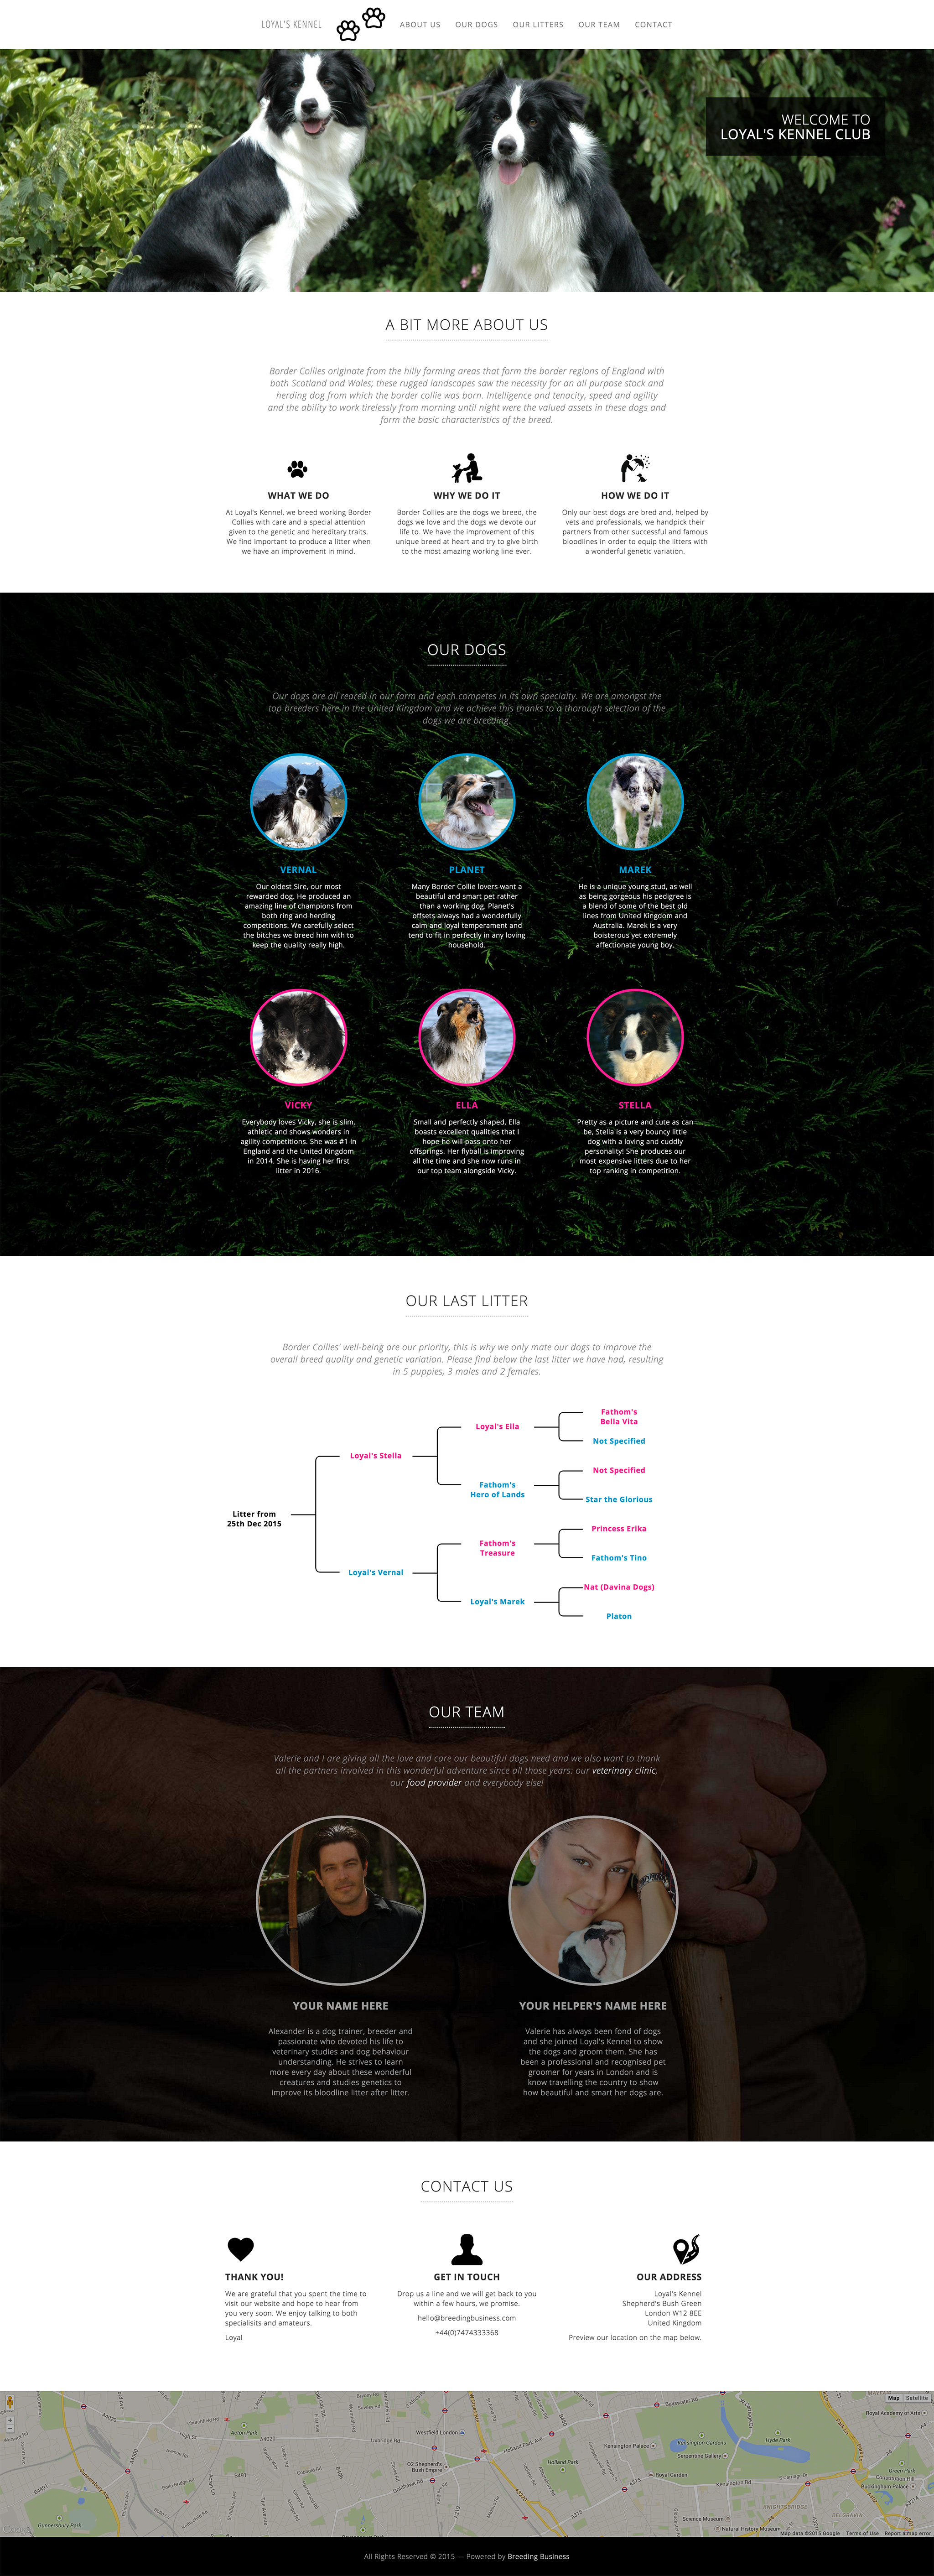 One-Page Dog Breeding Website Template For Dog Breeders with Best Dog Breeding Business Plan Template